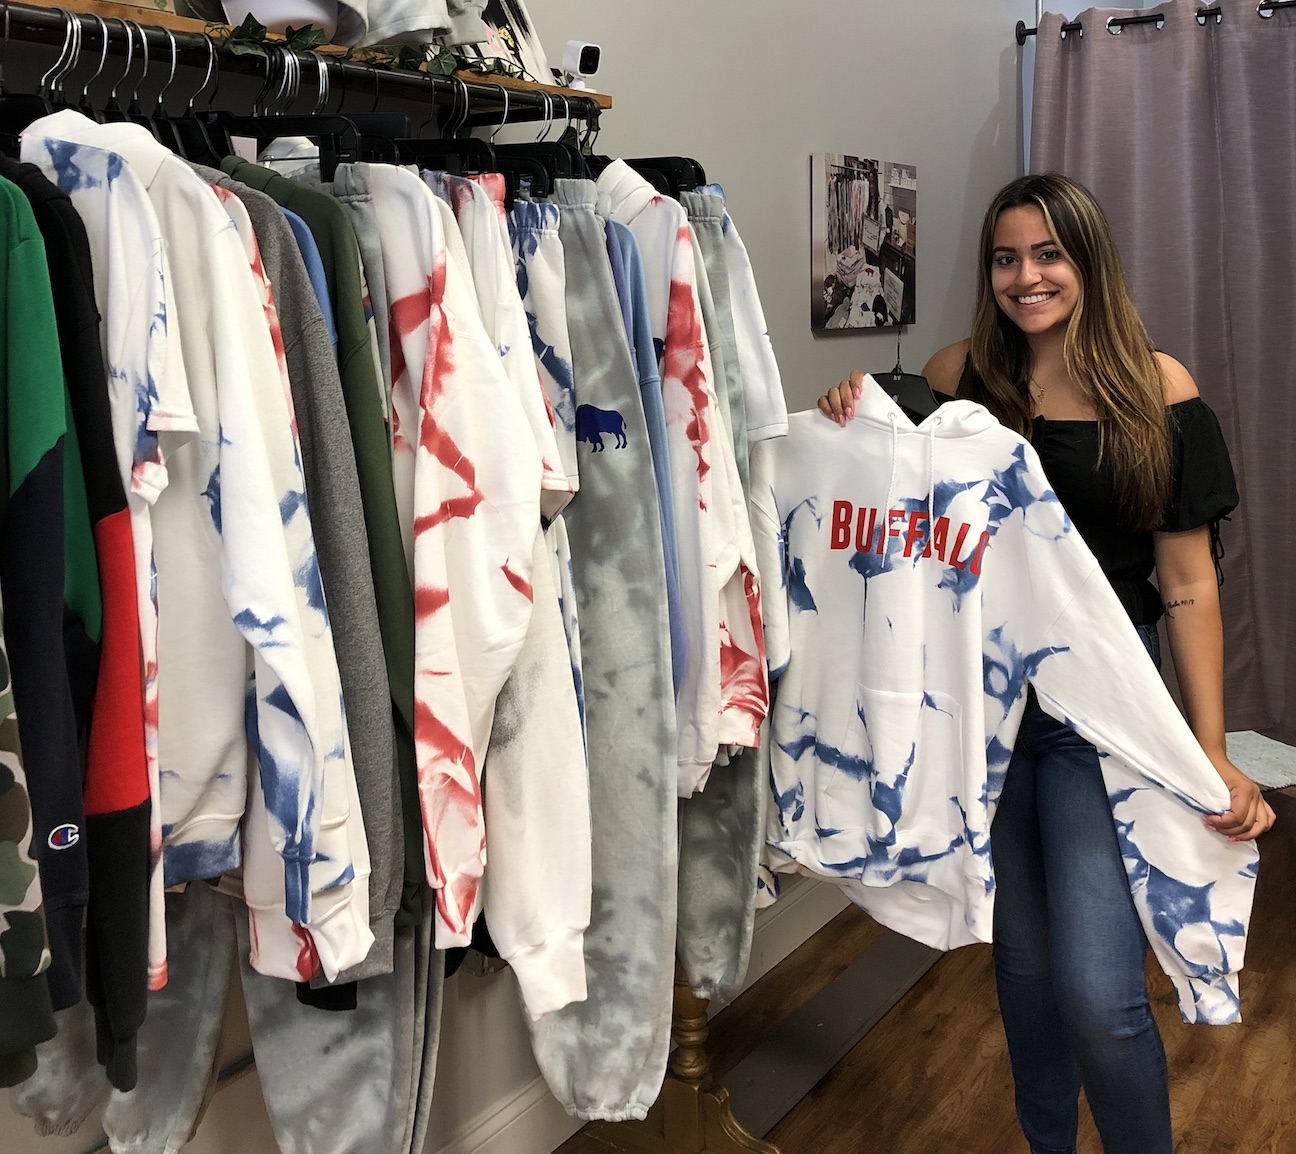 Cristina Catalano is shown with some of her Revamped New York clothing.